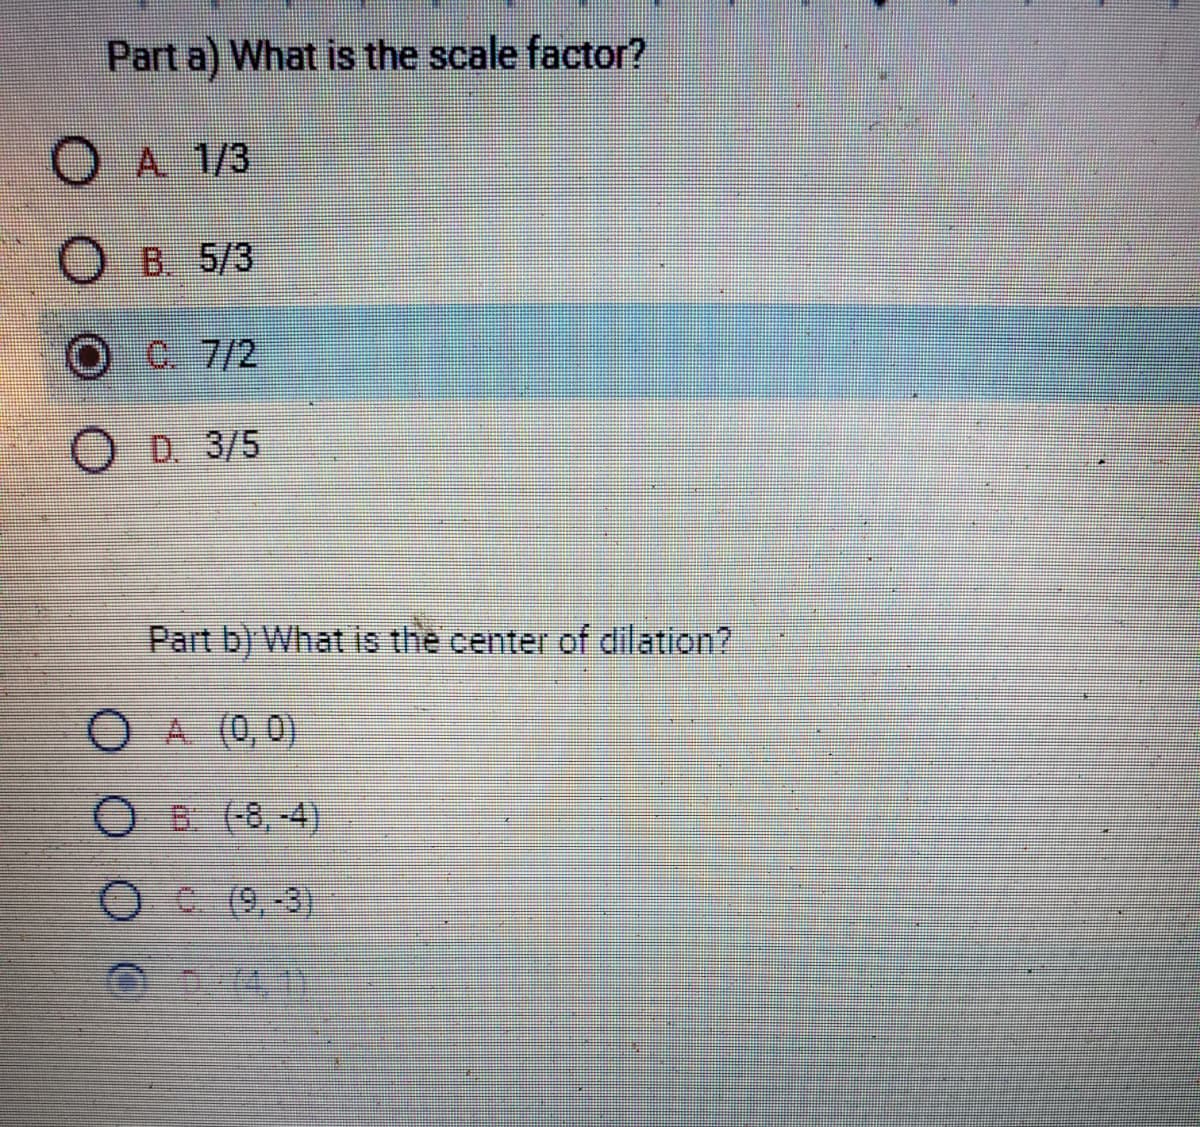 Part a) What is the scale factor?
A 1/3
O B. 5/3
OC. 7/2
D. 3/5
Part b) What is the center of dilation?
OA (0,0)
OB: (-8,-4)